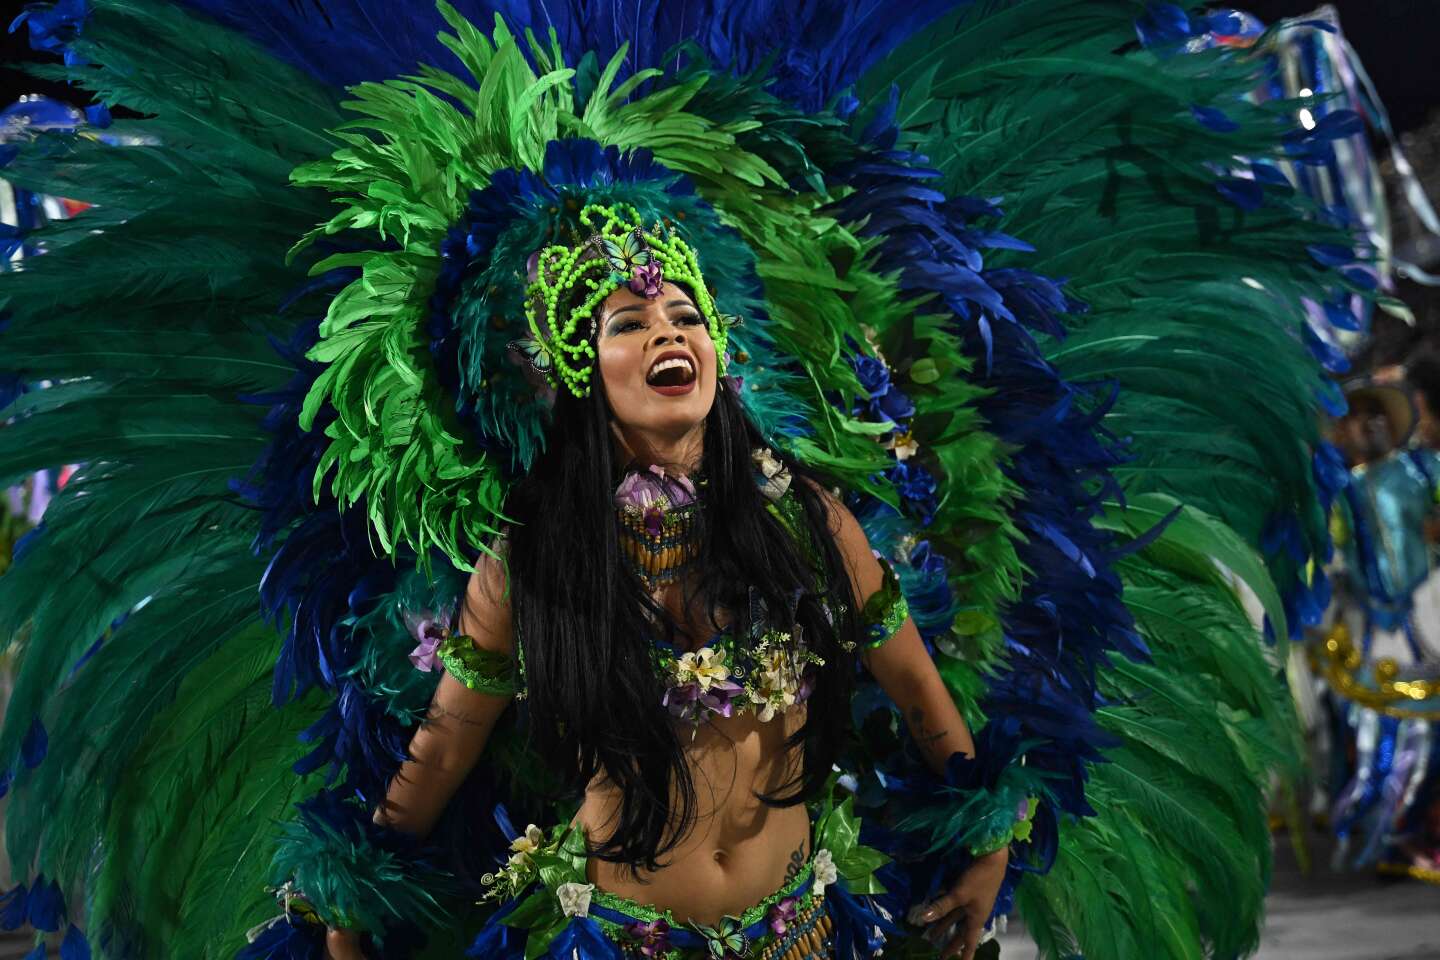 Rio Carnival is back